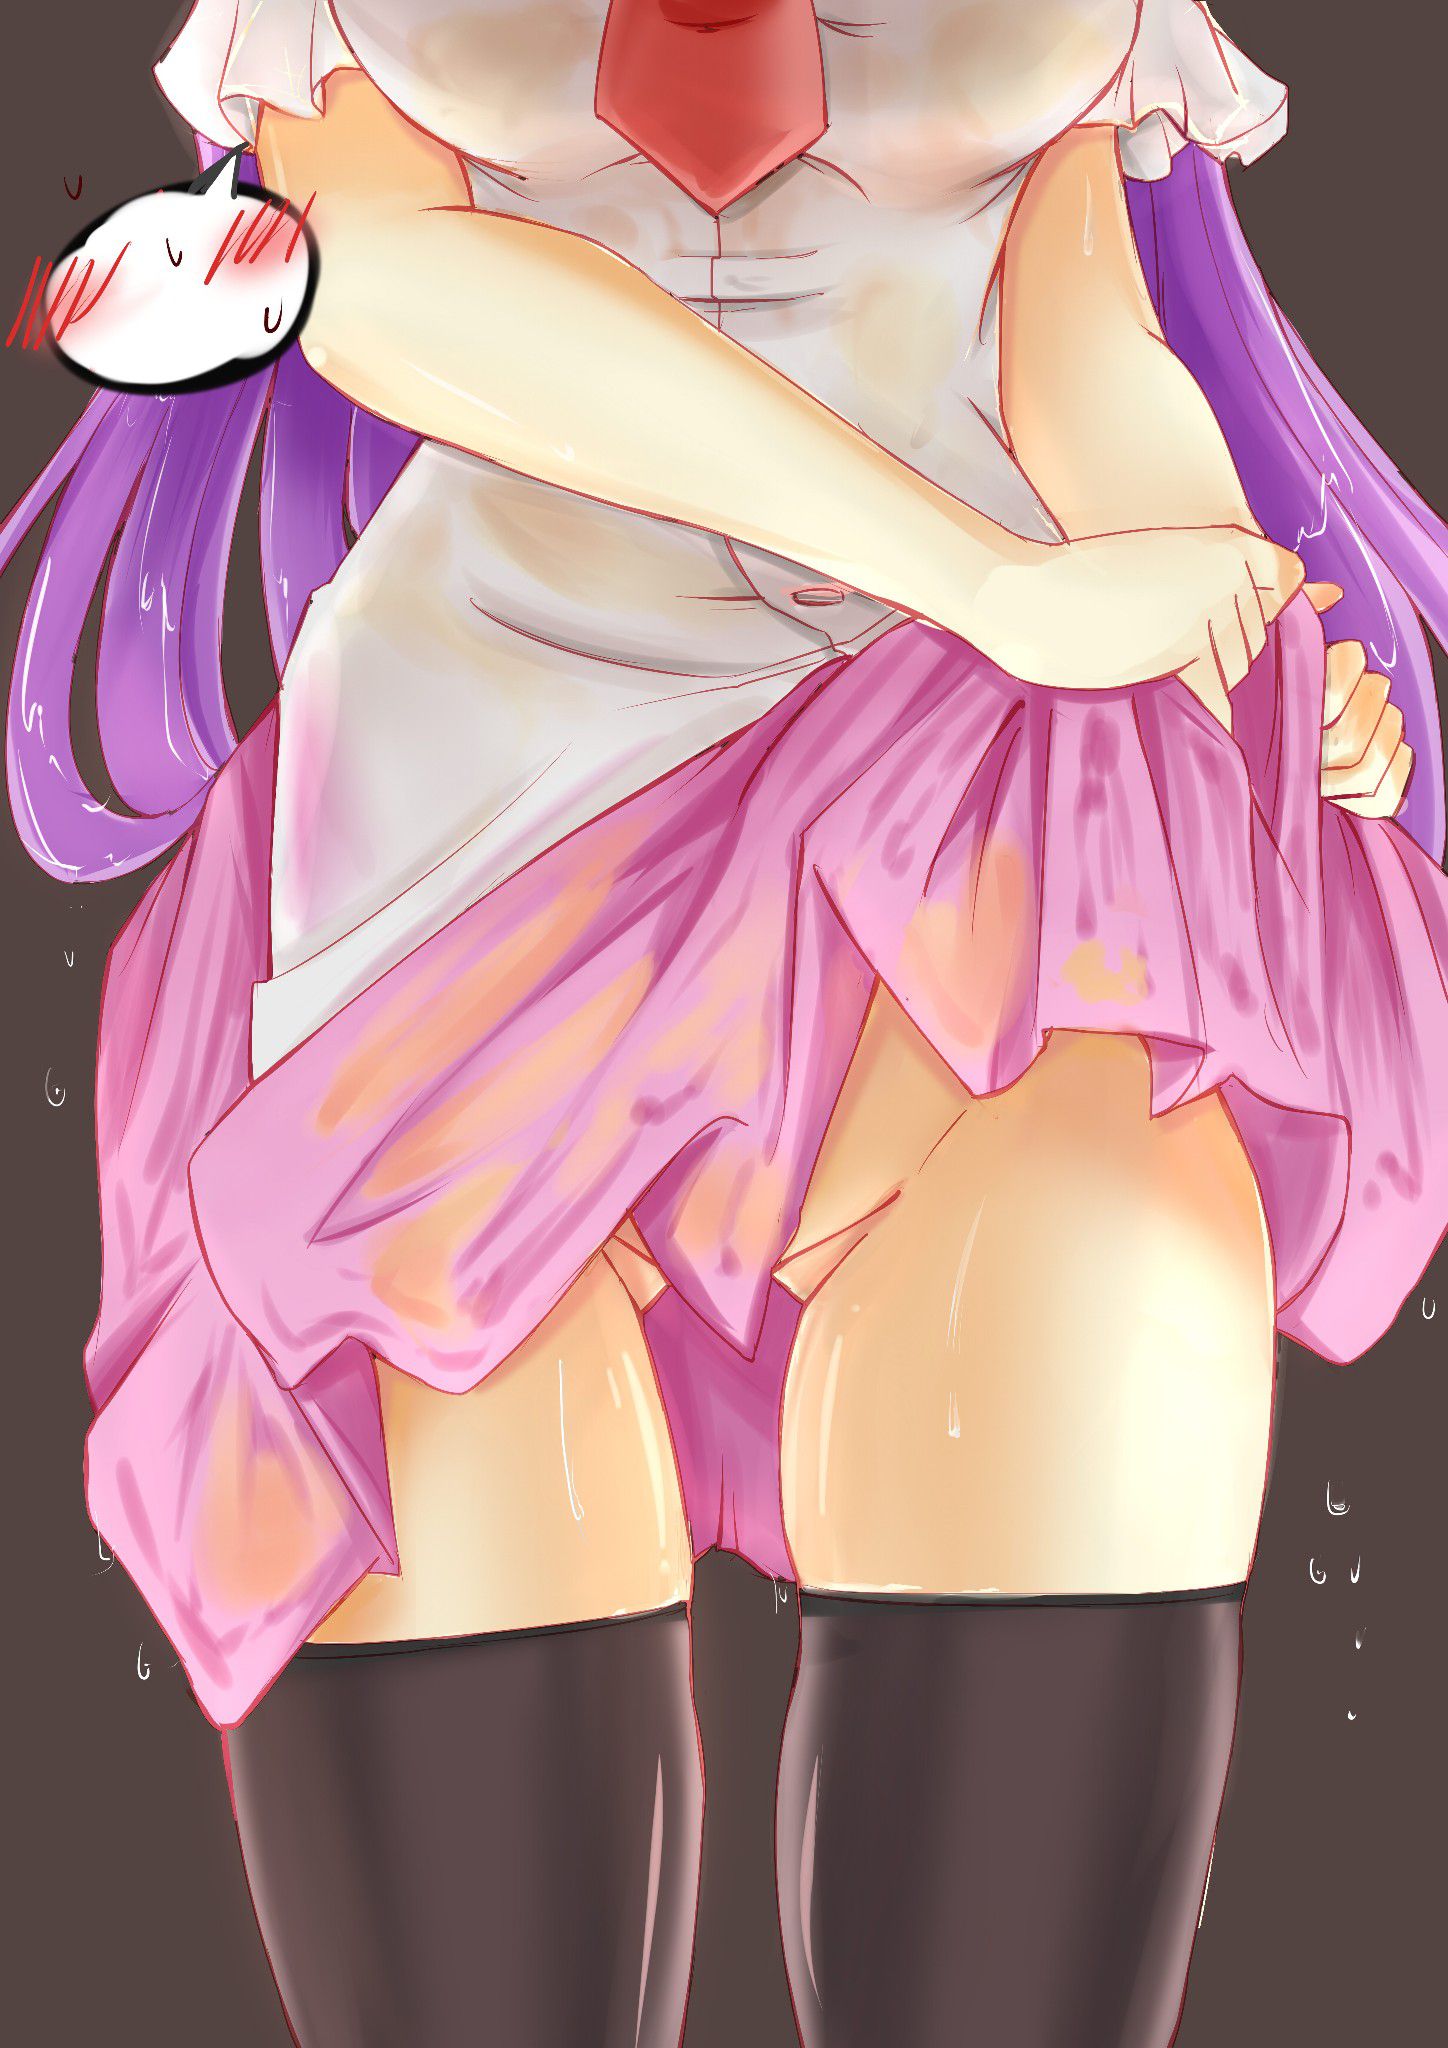 [Secondary erotic] [East] want to see naughty picture of Reisen udongein and Inova! 3 16